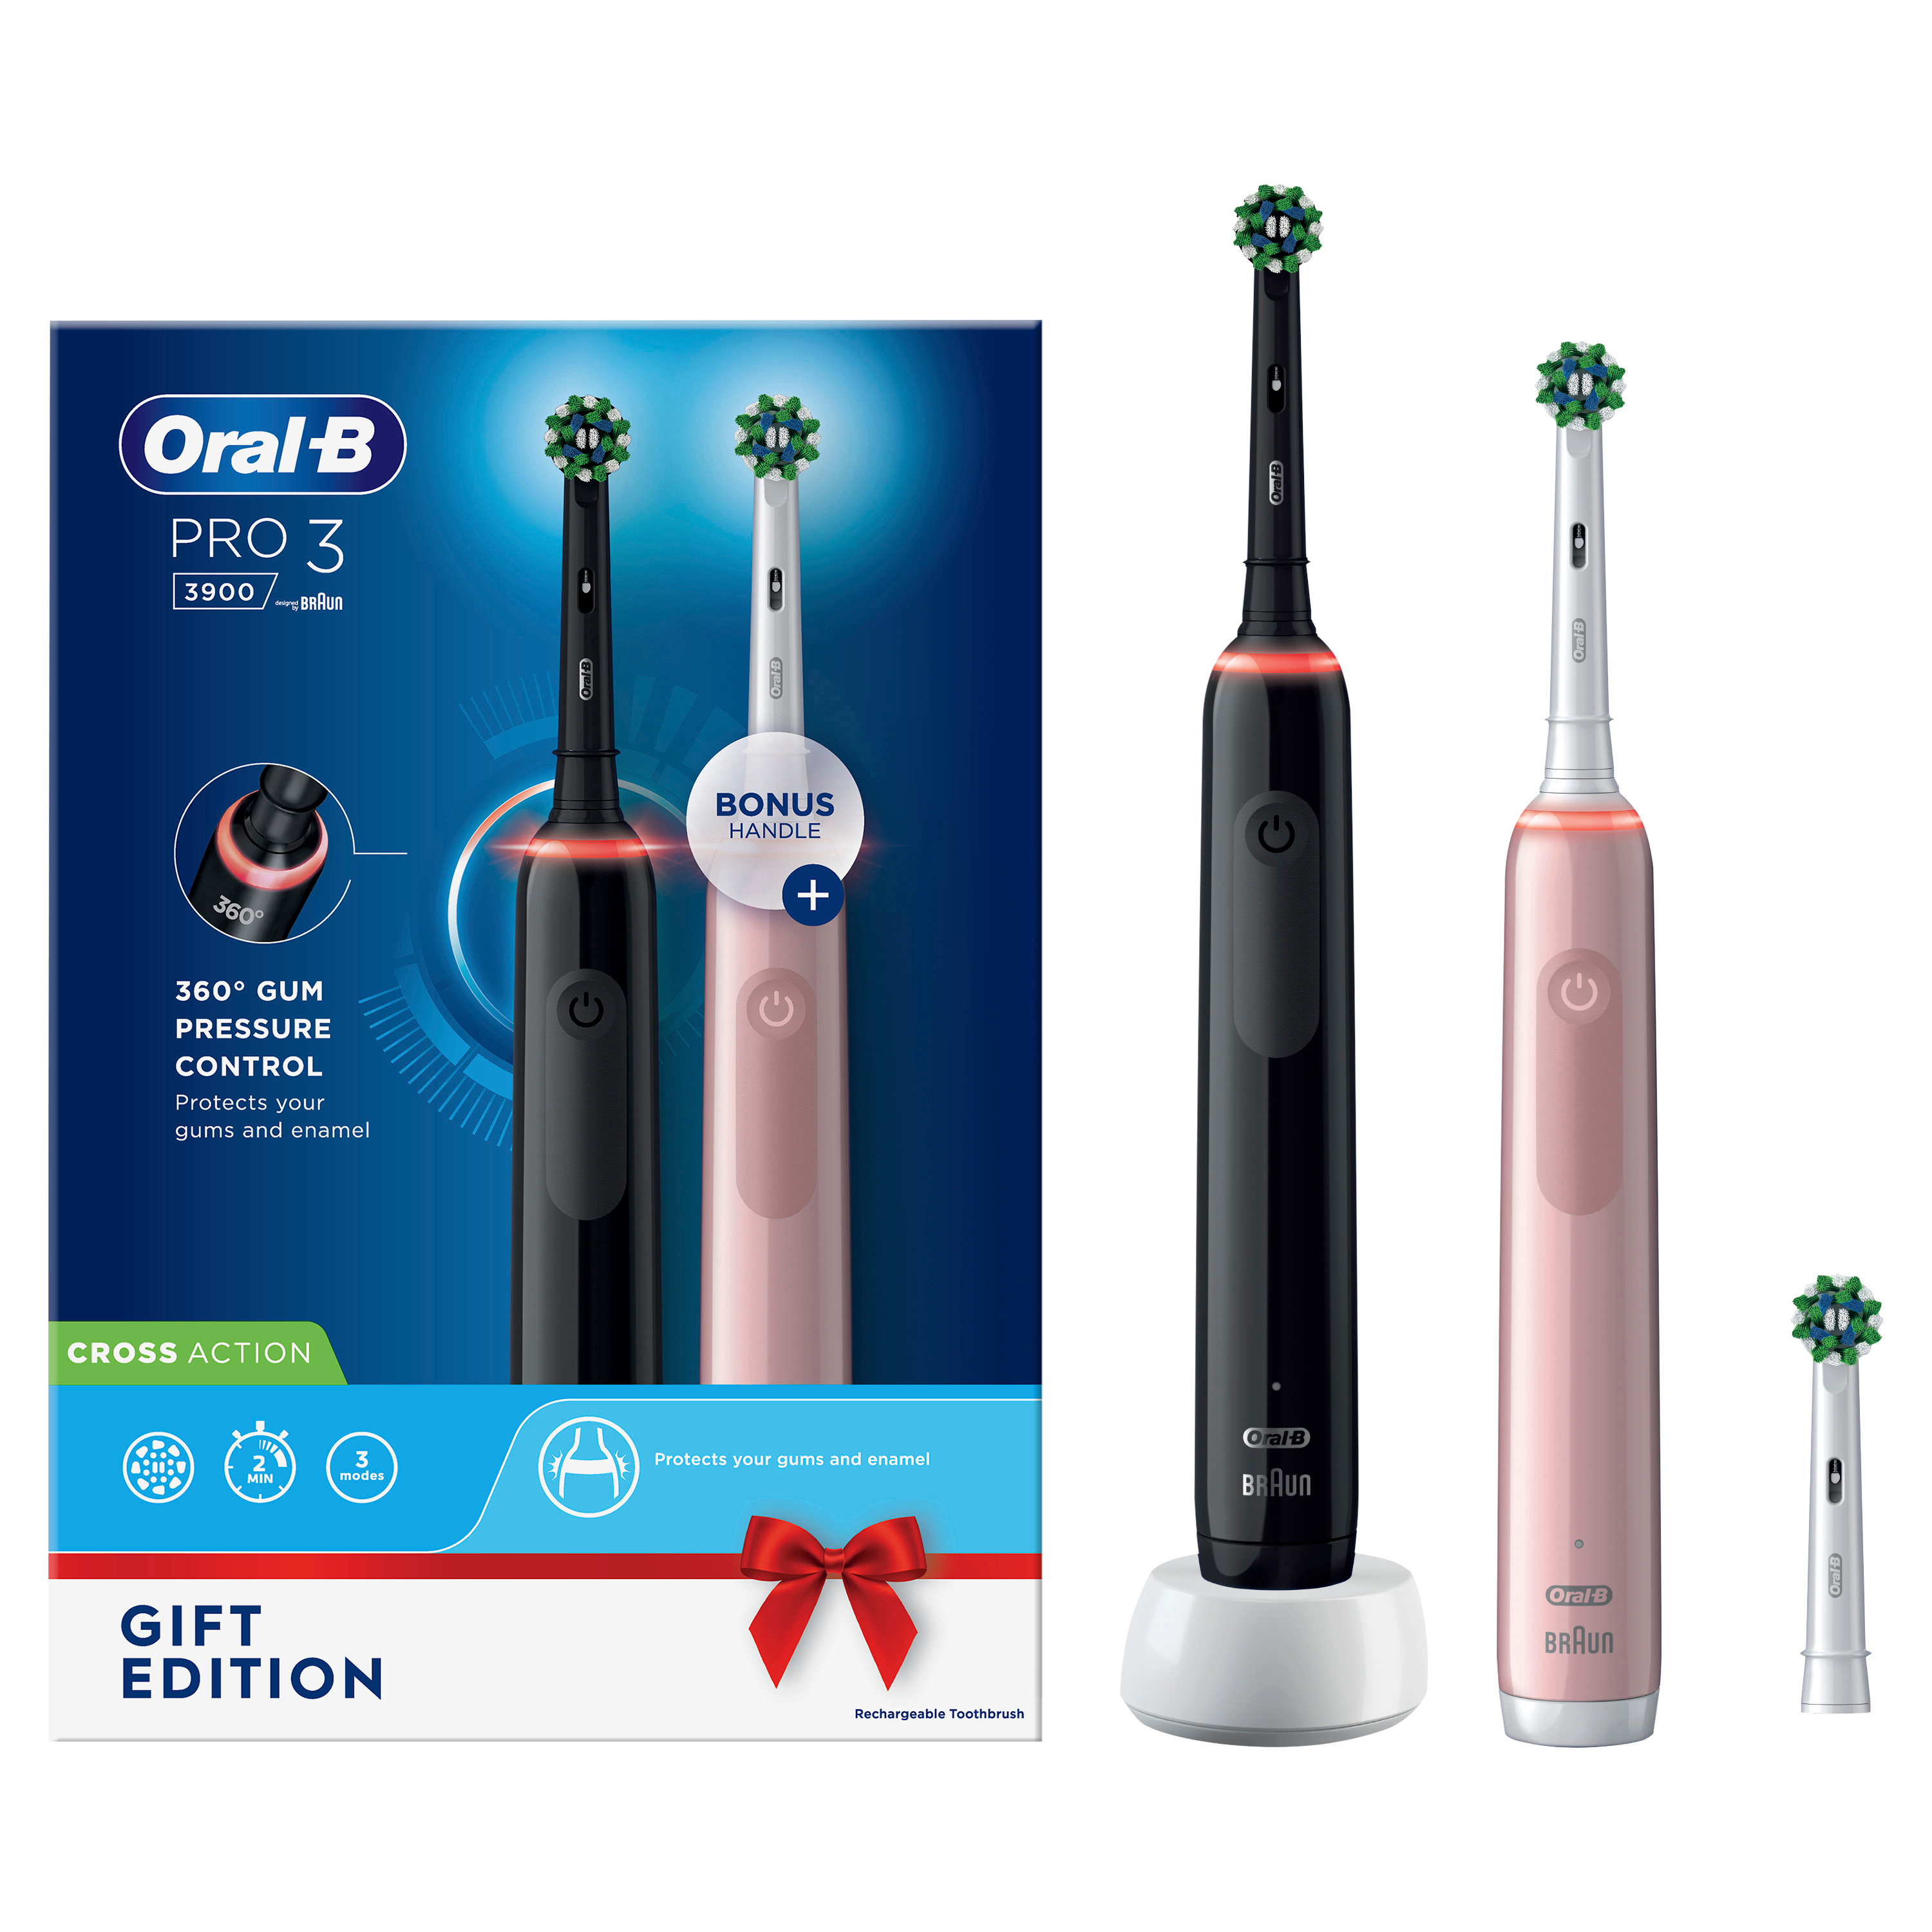 3900 Black-Pink Duopack PRO 3 Edition Oral-B